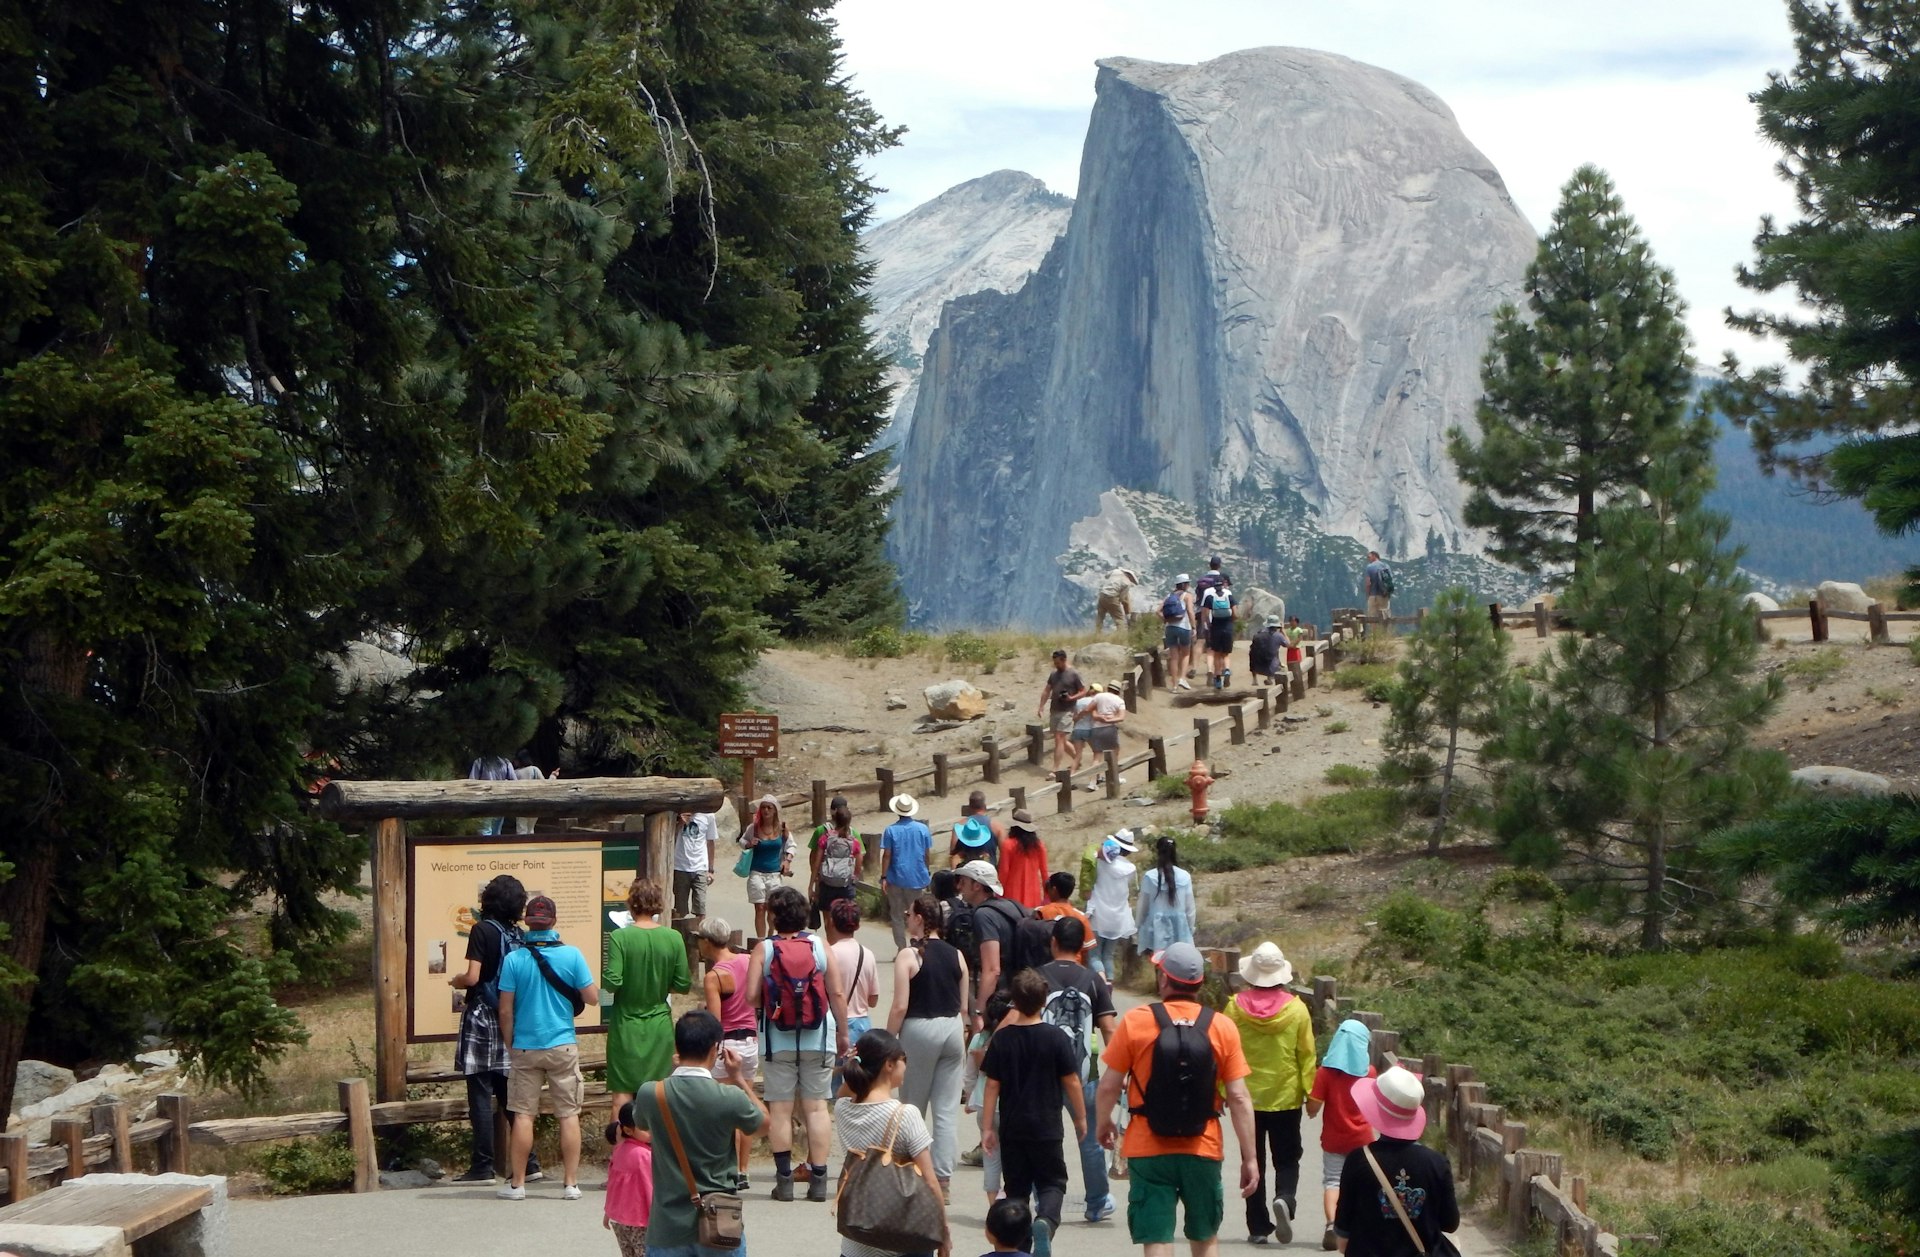 A crowd of tourists walking to Glacier Point with a background view of Half Dome at Yosemite National Park.